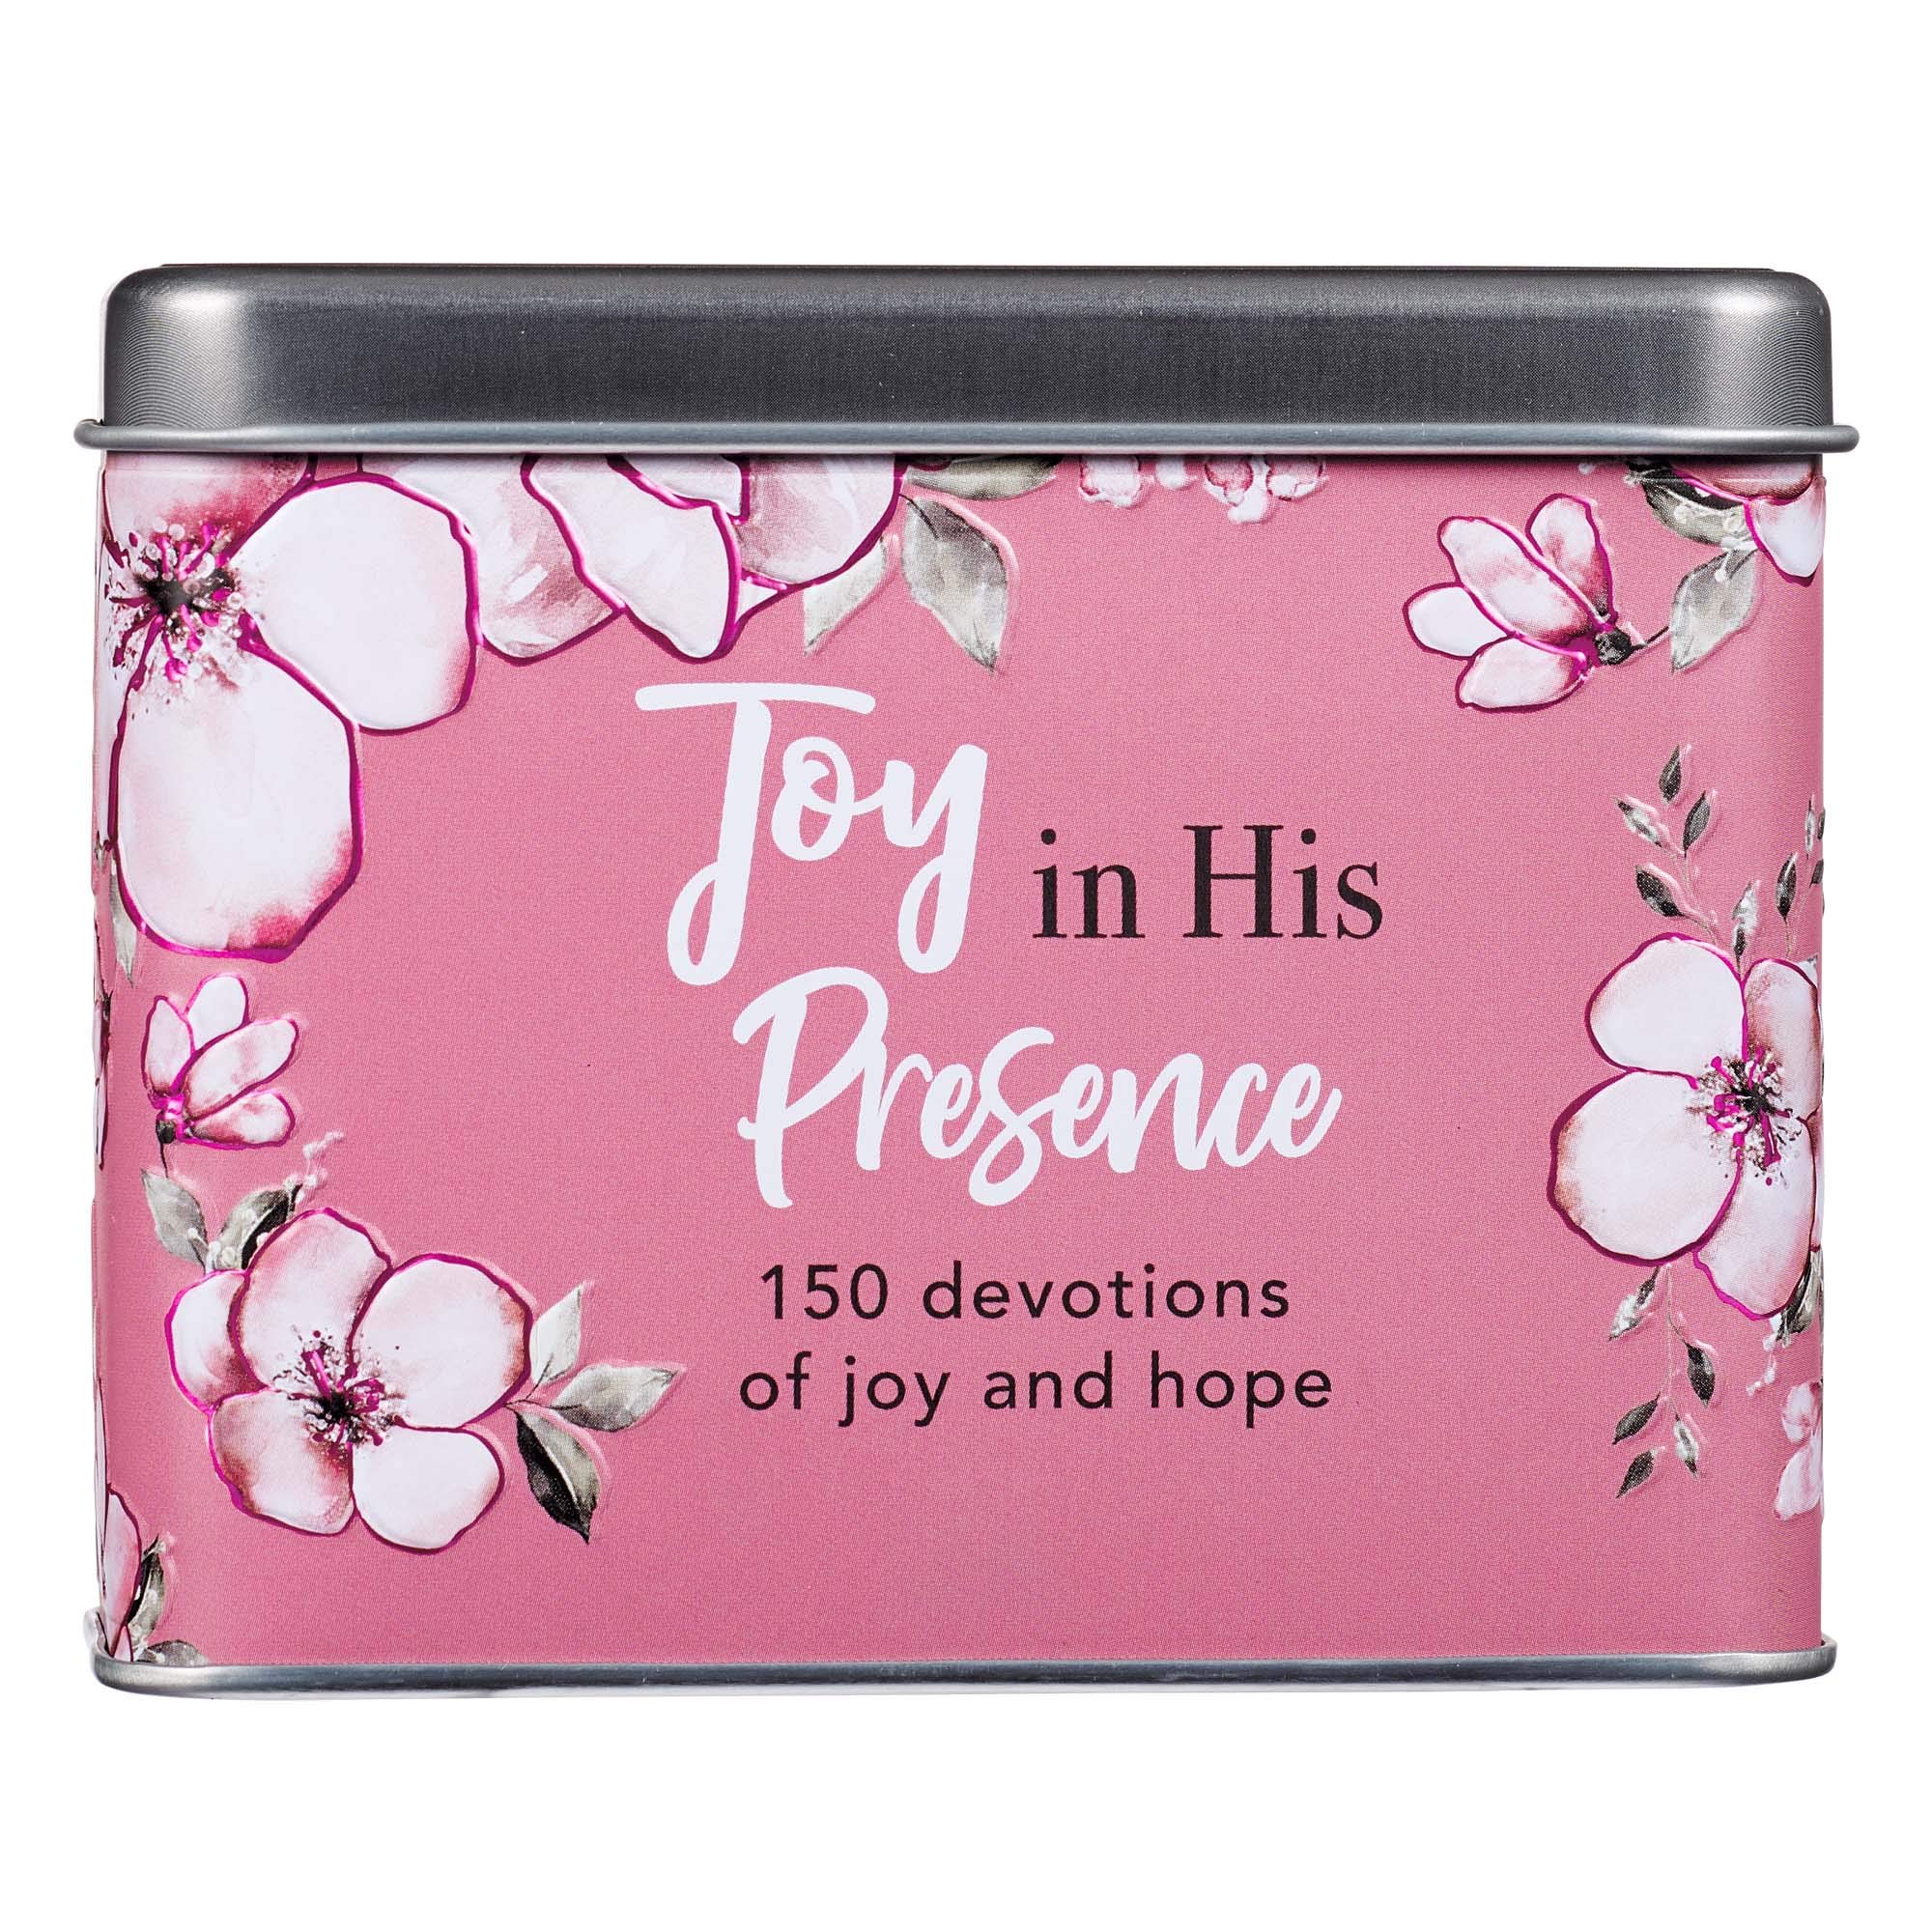 Christian Art Gifts Devotions For Women | Joy In His Presence – 150 Devotions of Joy and Hope | Daily Encouraging Cards for Women w/Bible Verses and Prayer